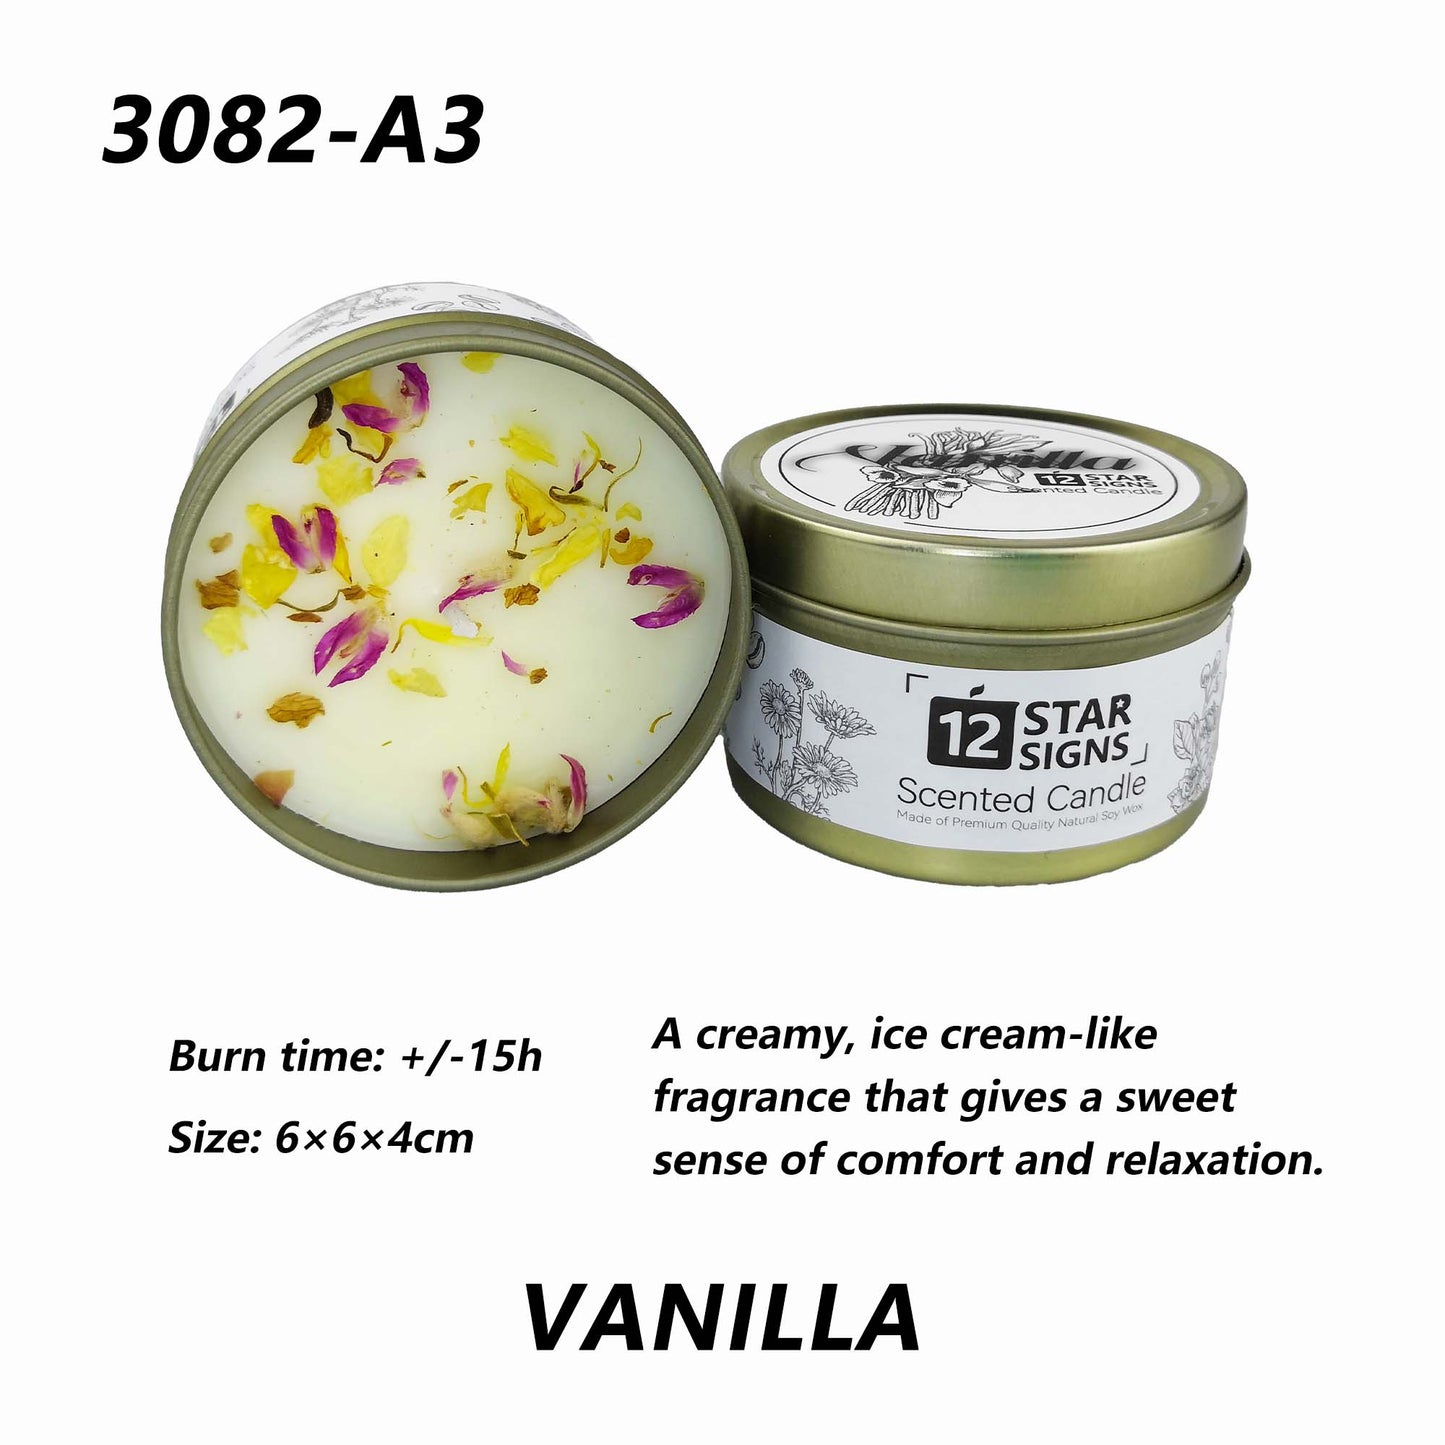 12StarSigns 20hrs Soy Scented Candle